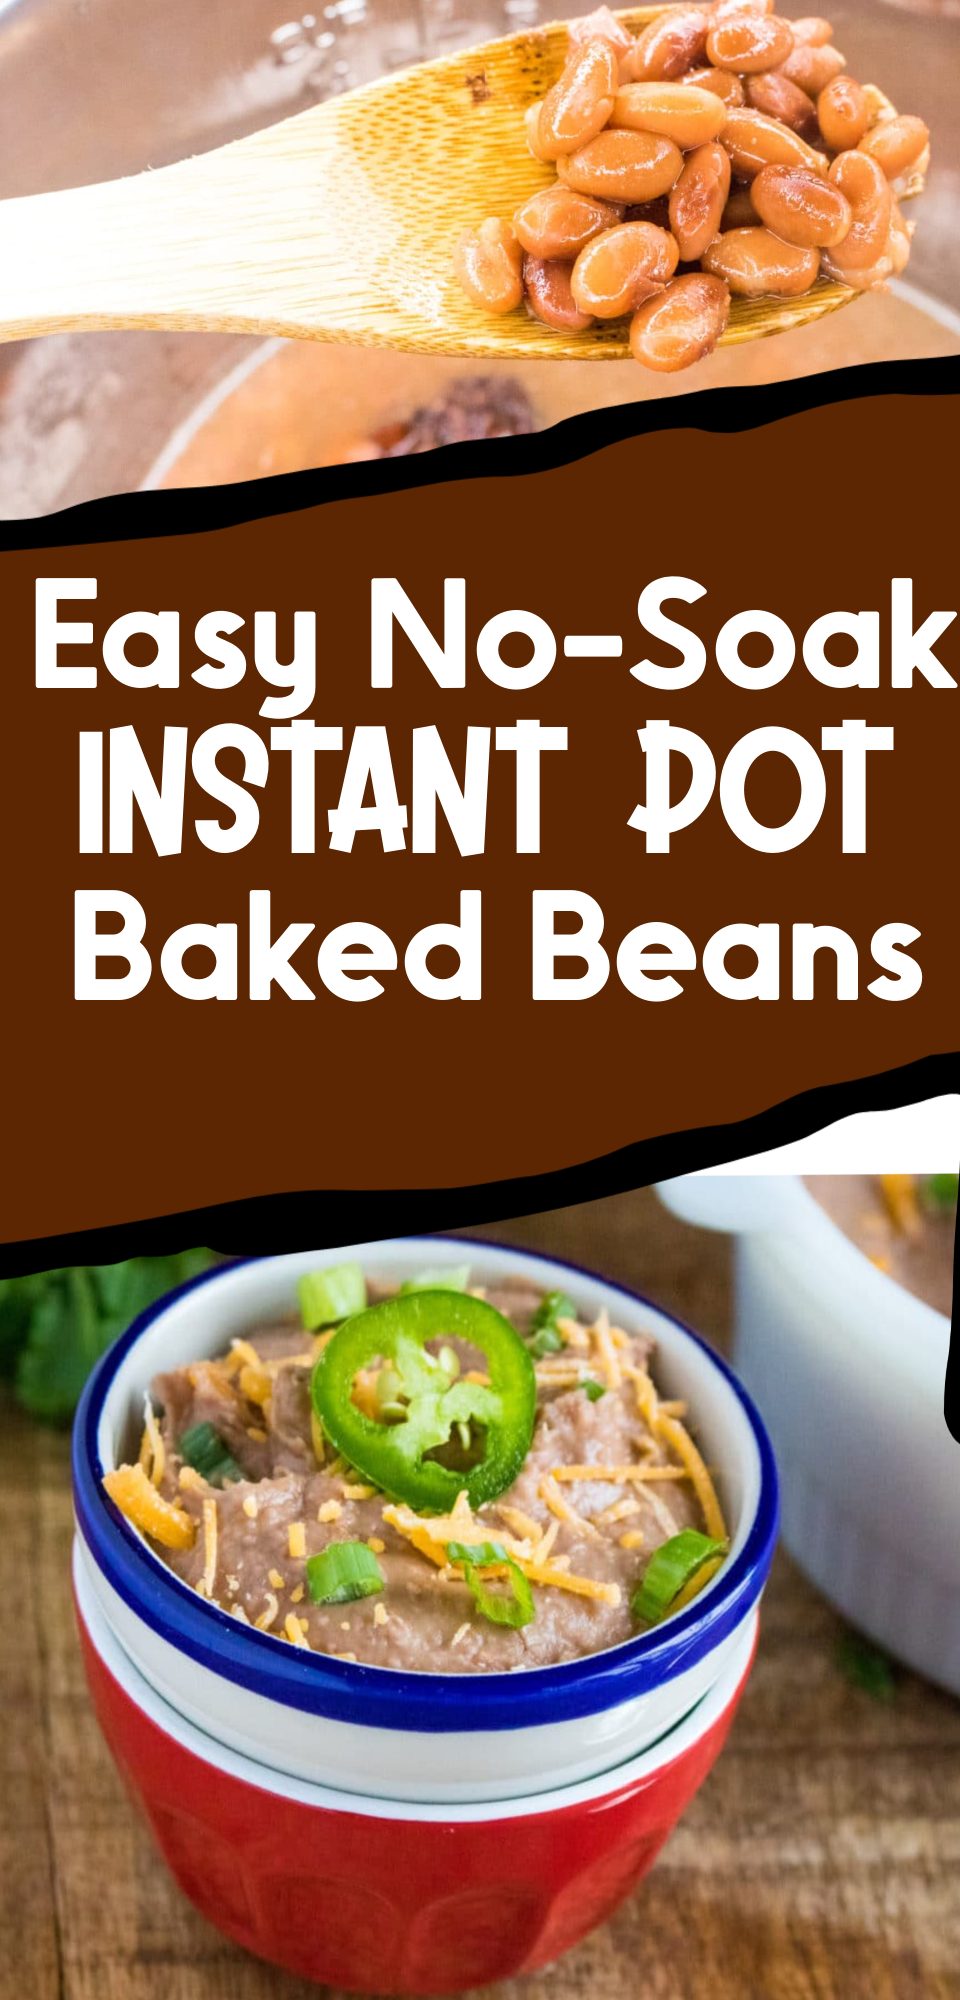 Who doesn't love refried beans? Here is an easy, Instant Pot refried bean recipe. They are so simple to throw together, and they pack in some great flavor.